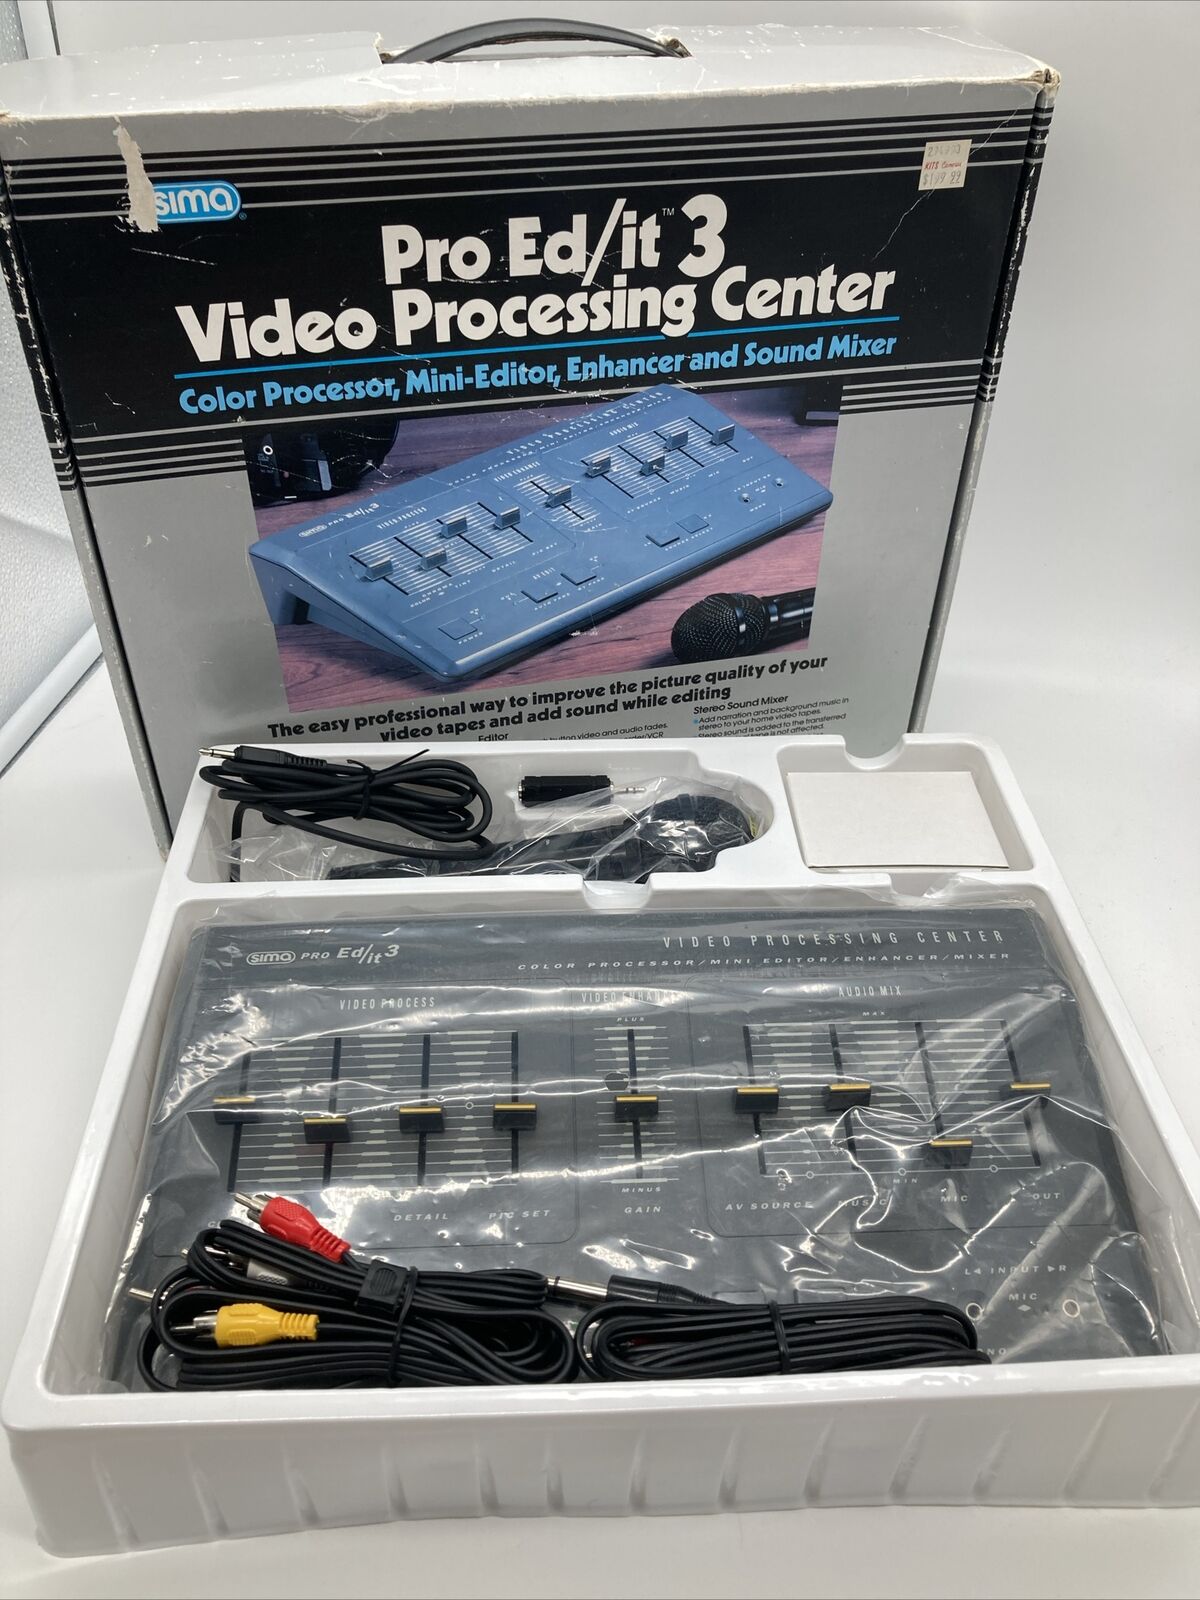 SIMA Pro Ed/it 3X Digital Video Processing Center Vintage SIMA Does Not Apply